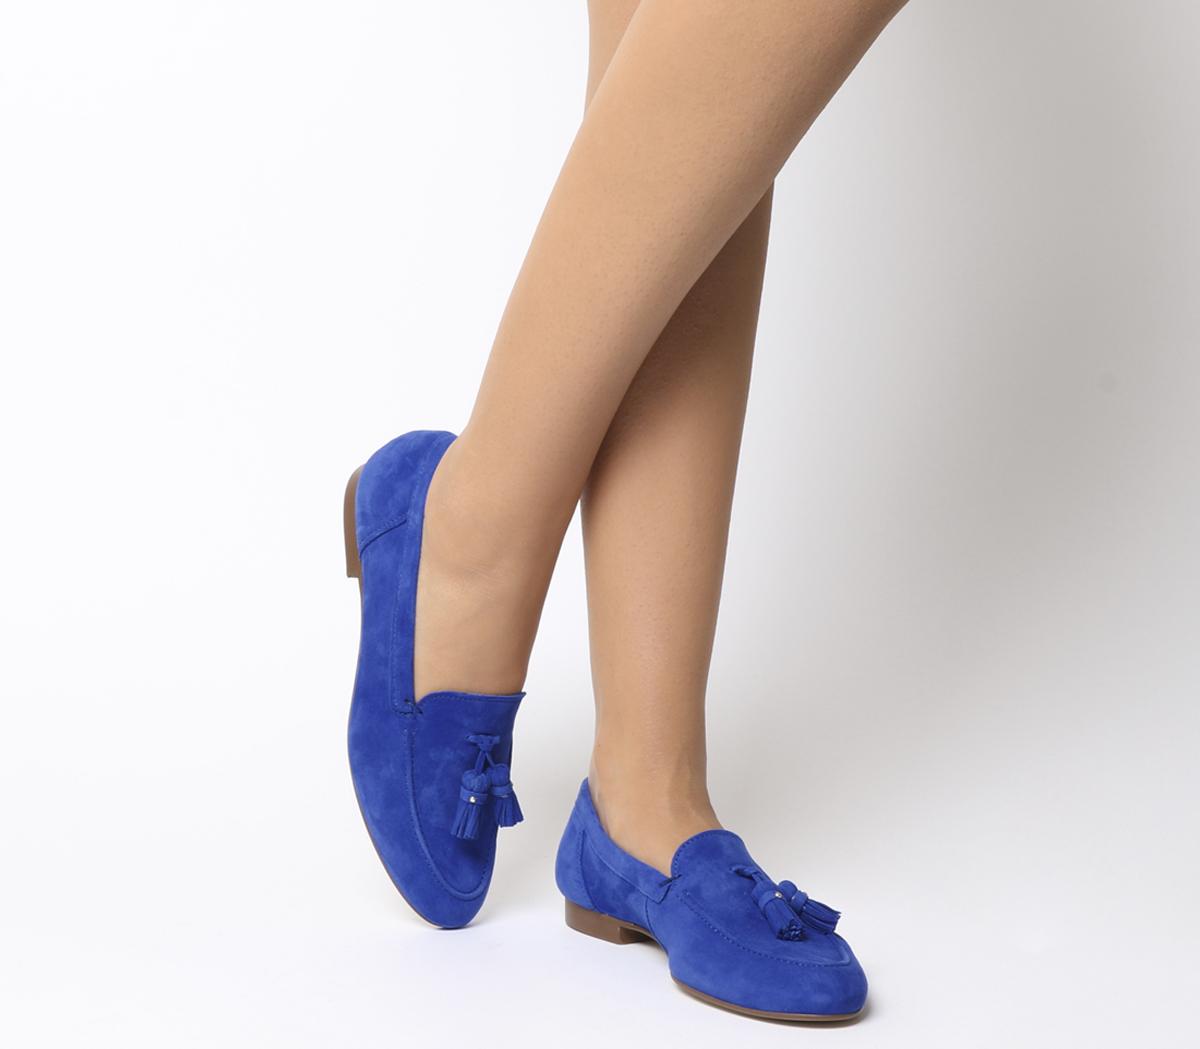 OFFICERetro Tassel LoafersBright Blue Suede